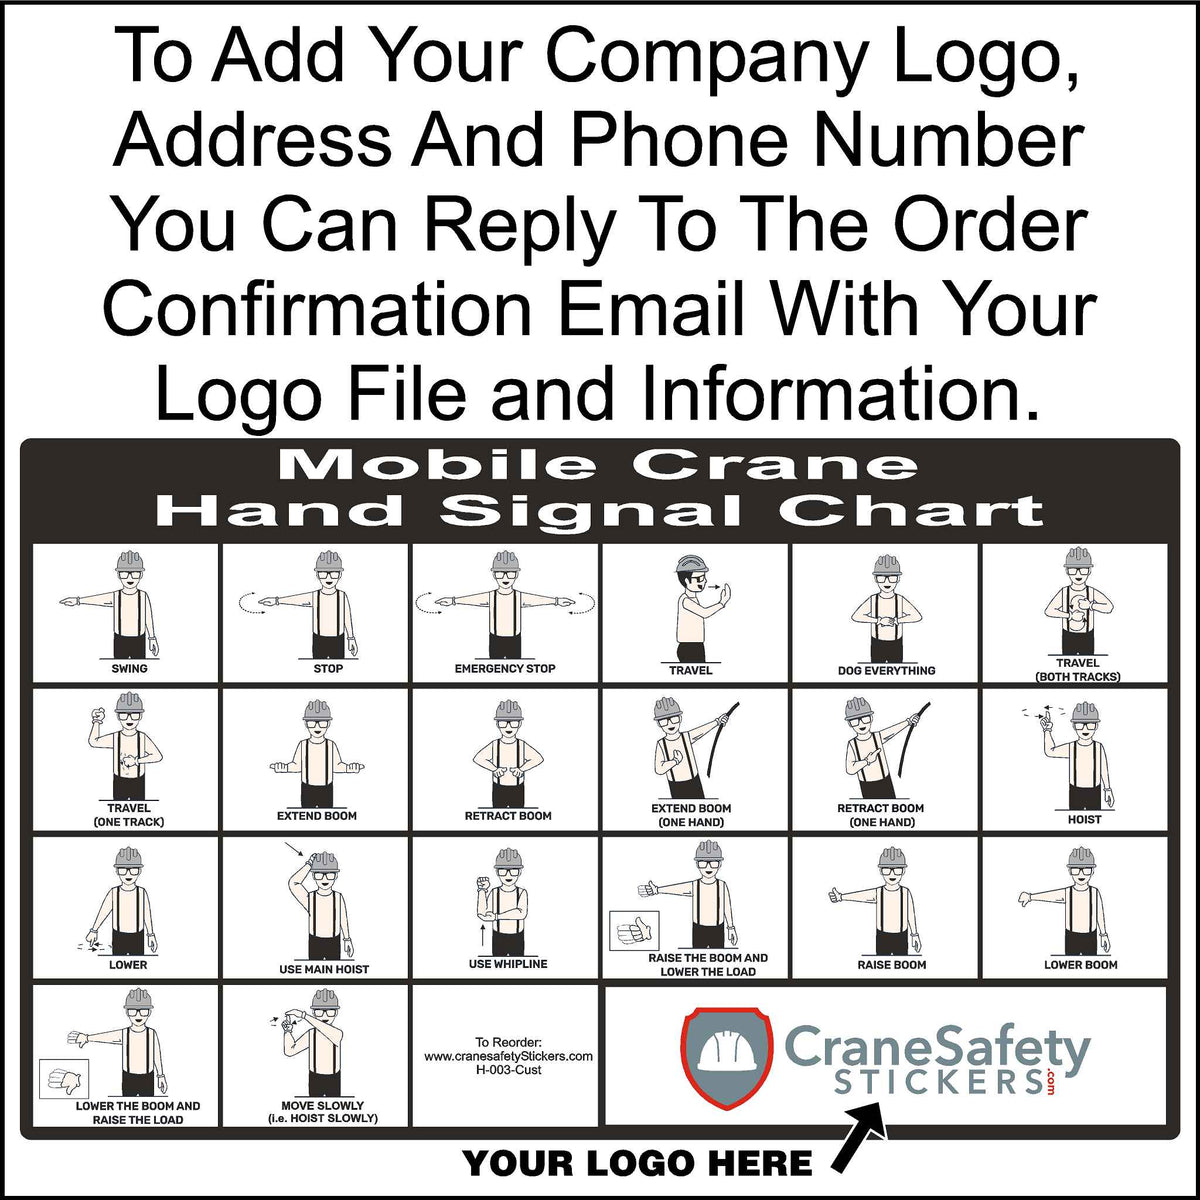 Custom Crane Hand Signal Chart We Print This With Your Company Logo. 8.25 Inches tall by 14 Inches Wide in Size.